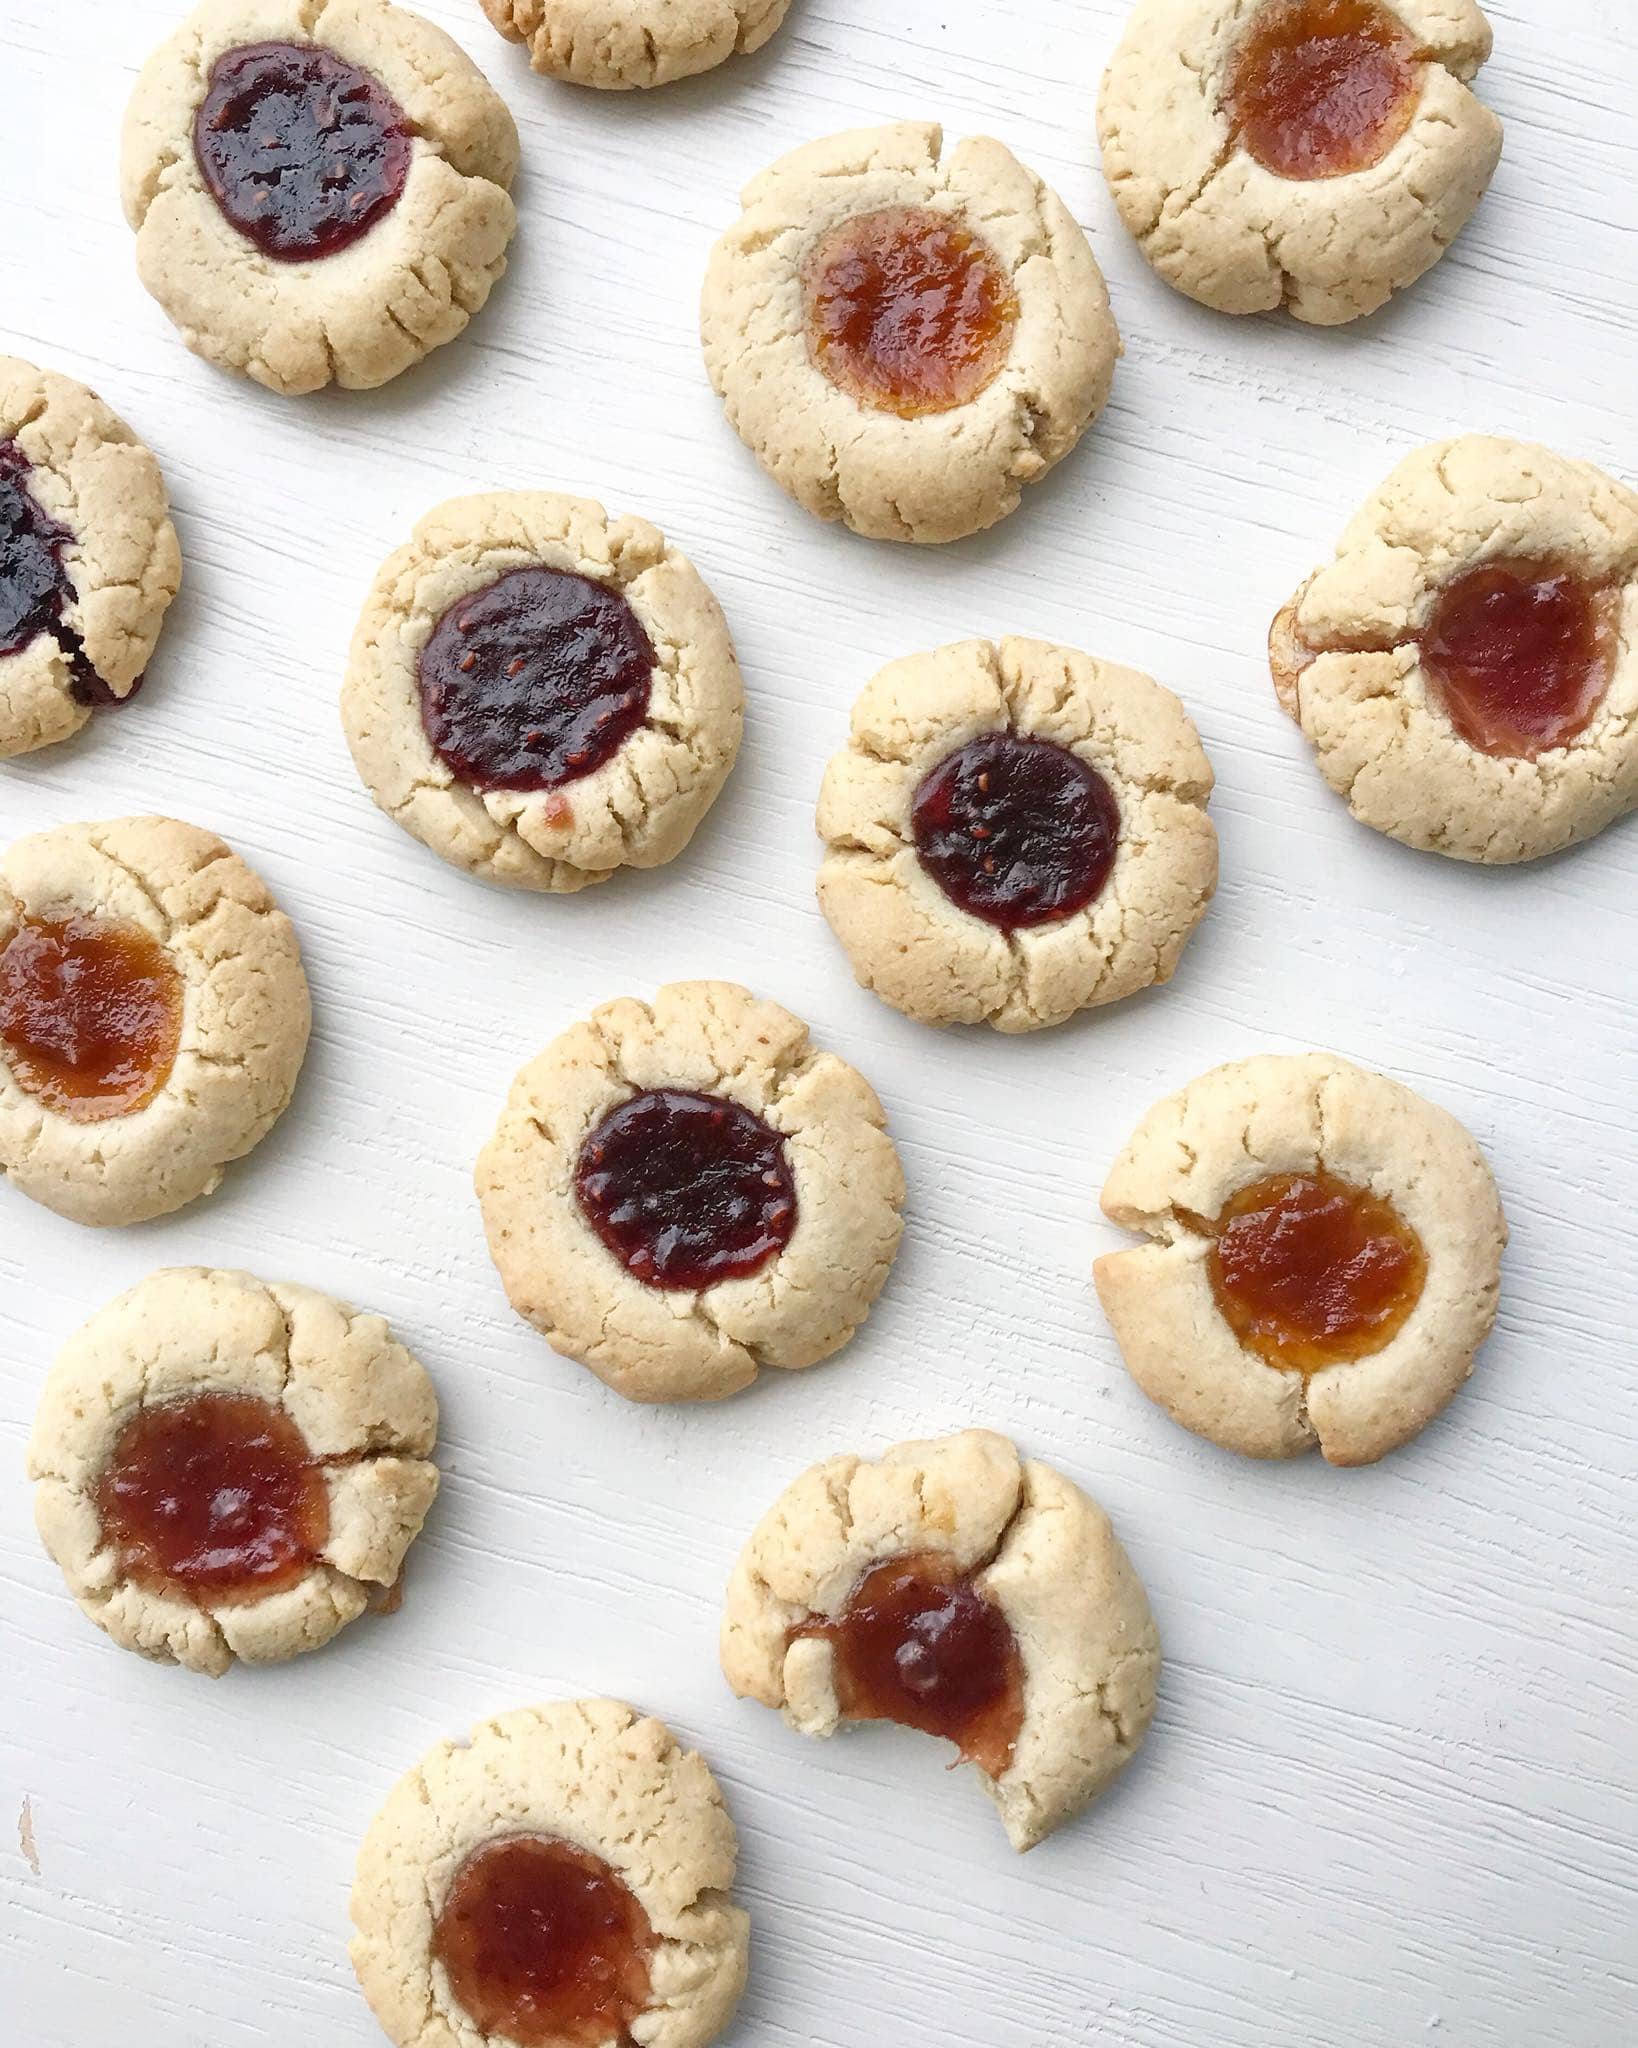 A group of gluten-free jam drop biscuits with different jams in the middle.